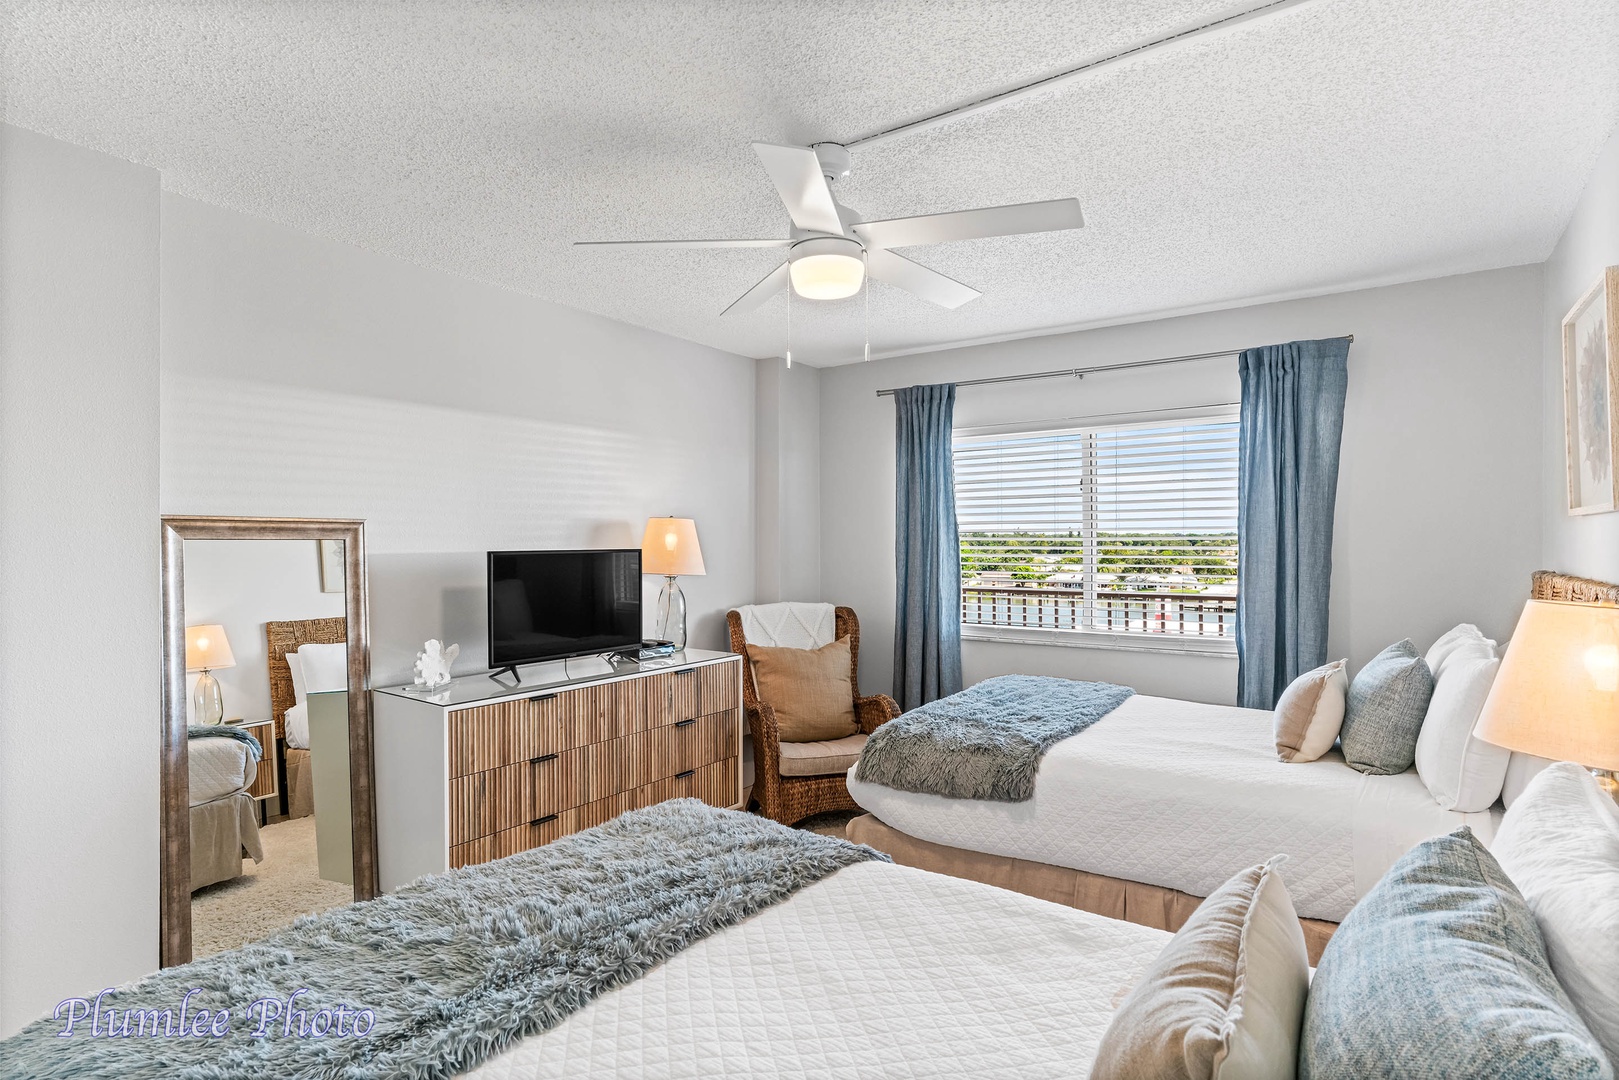 Second bedroom with view of Intracoastal